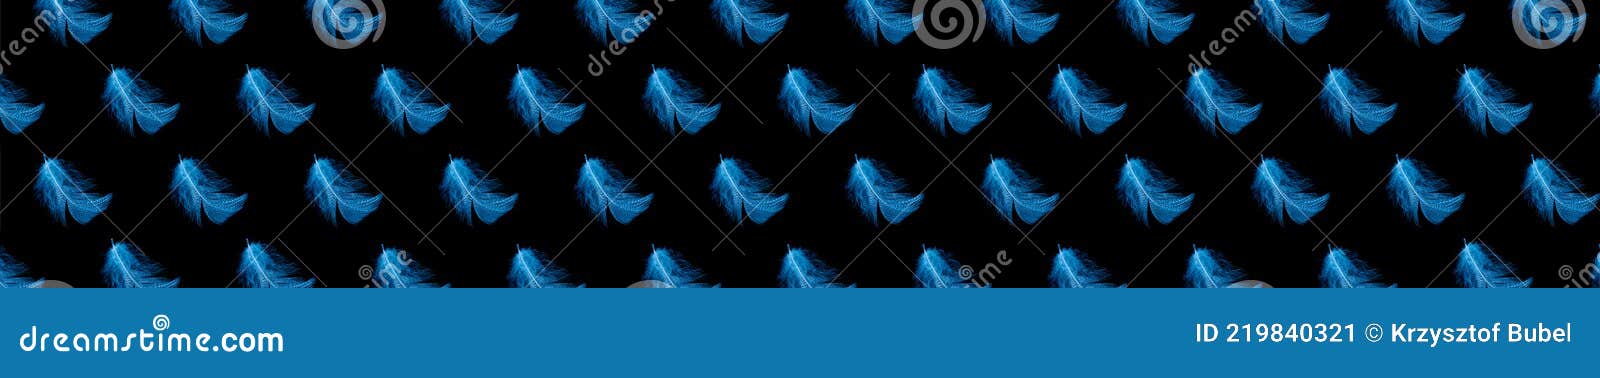 blue feathers on a black background. textura